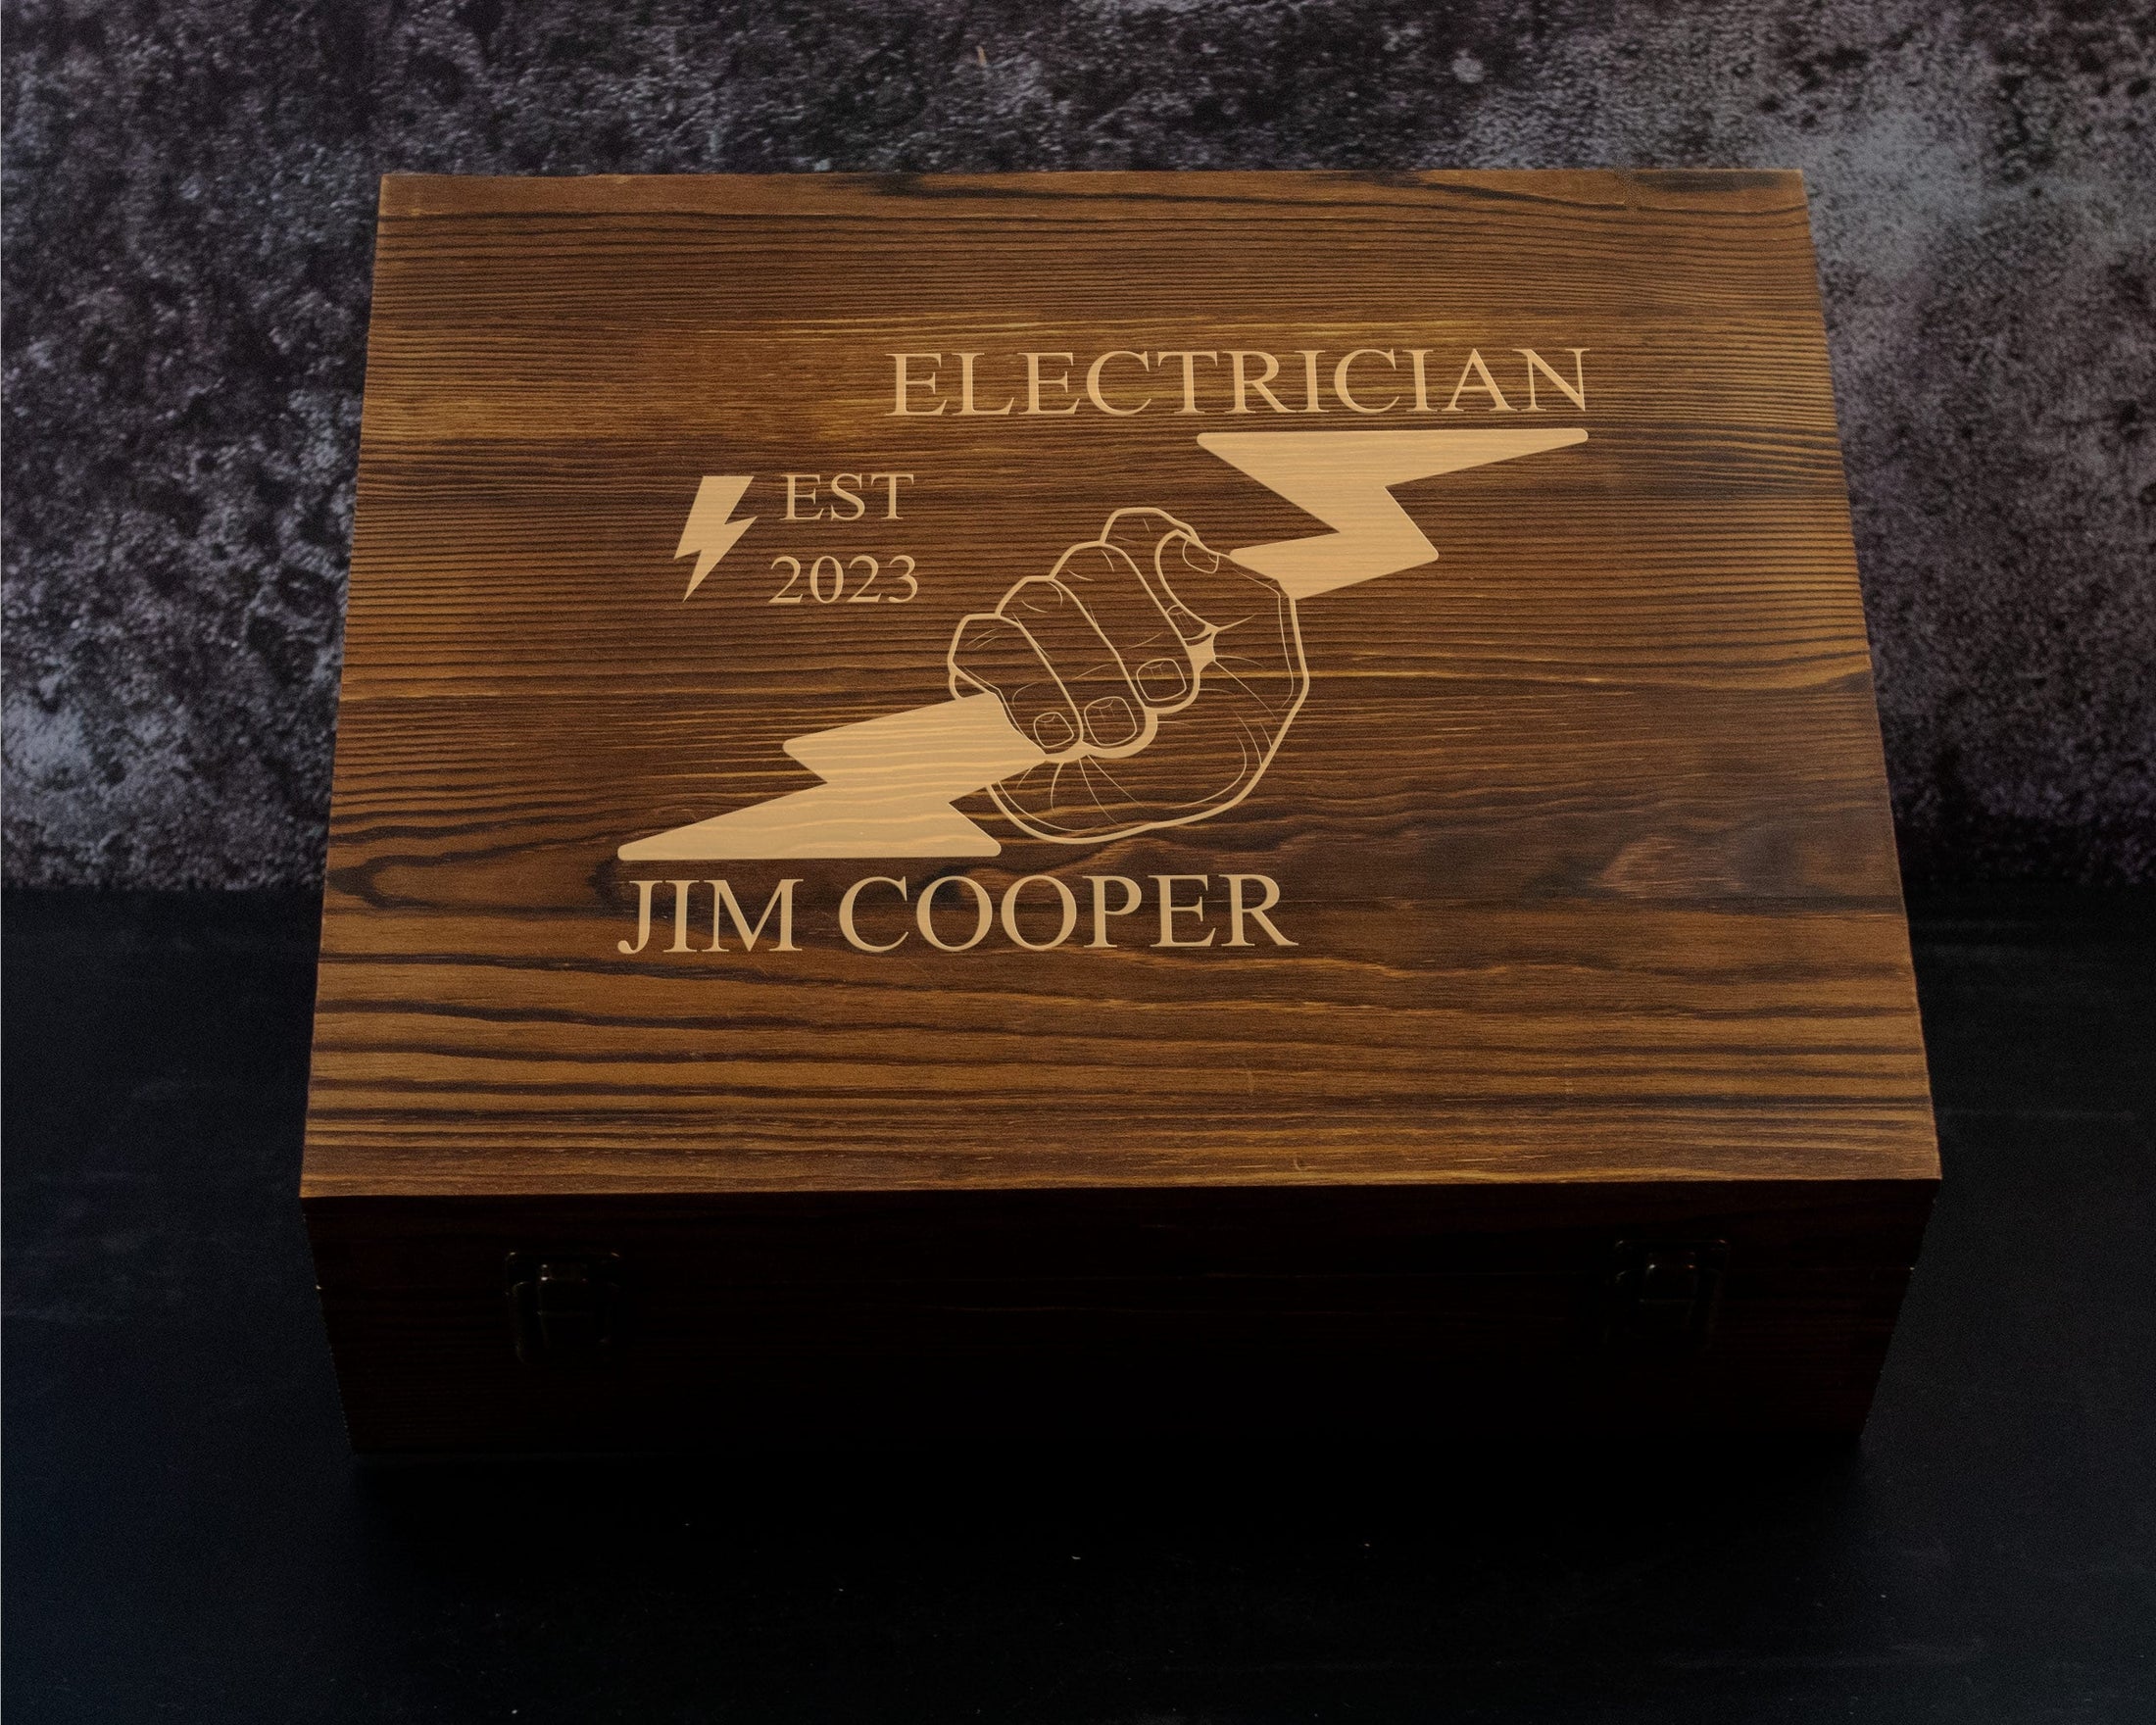 Electrician - Personalized Whiskey Decanter Set in a Wood Gift Box